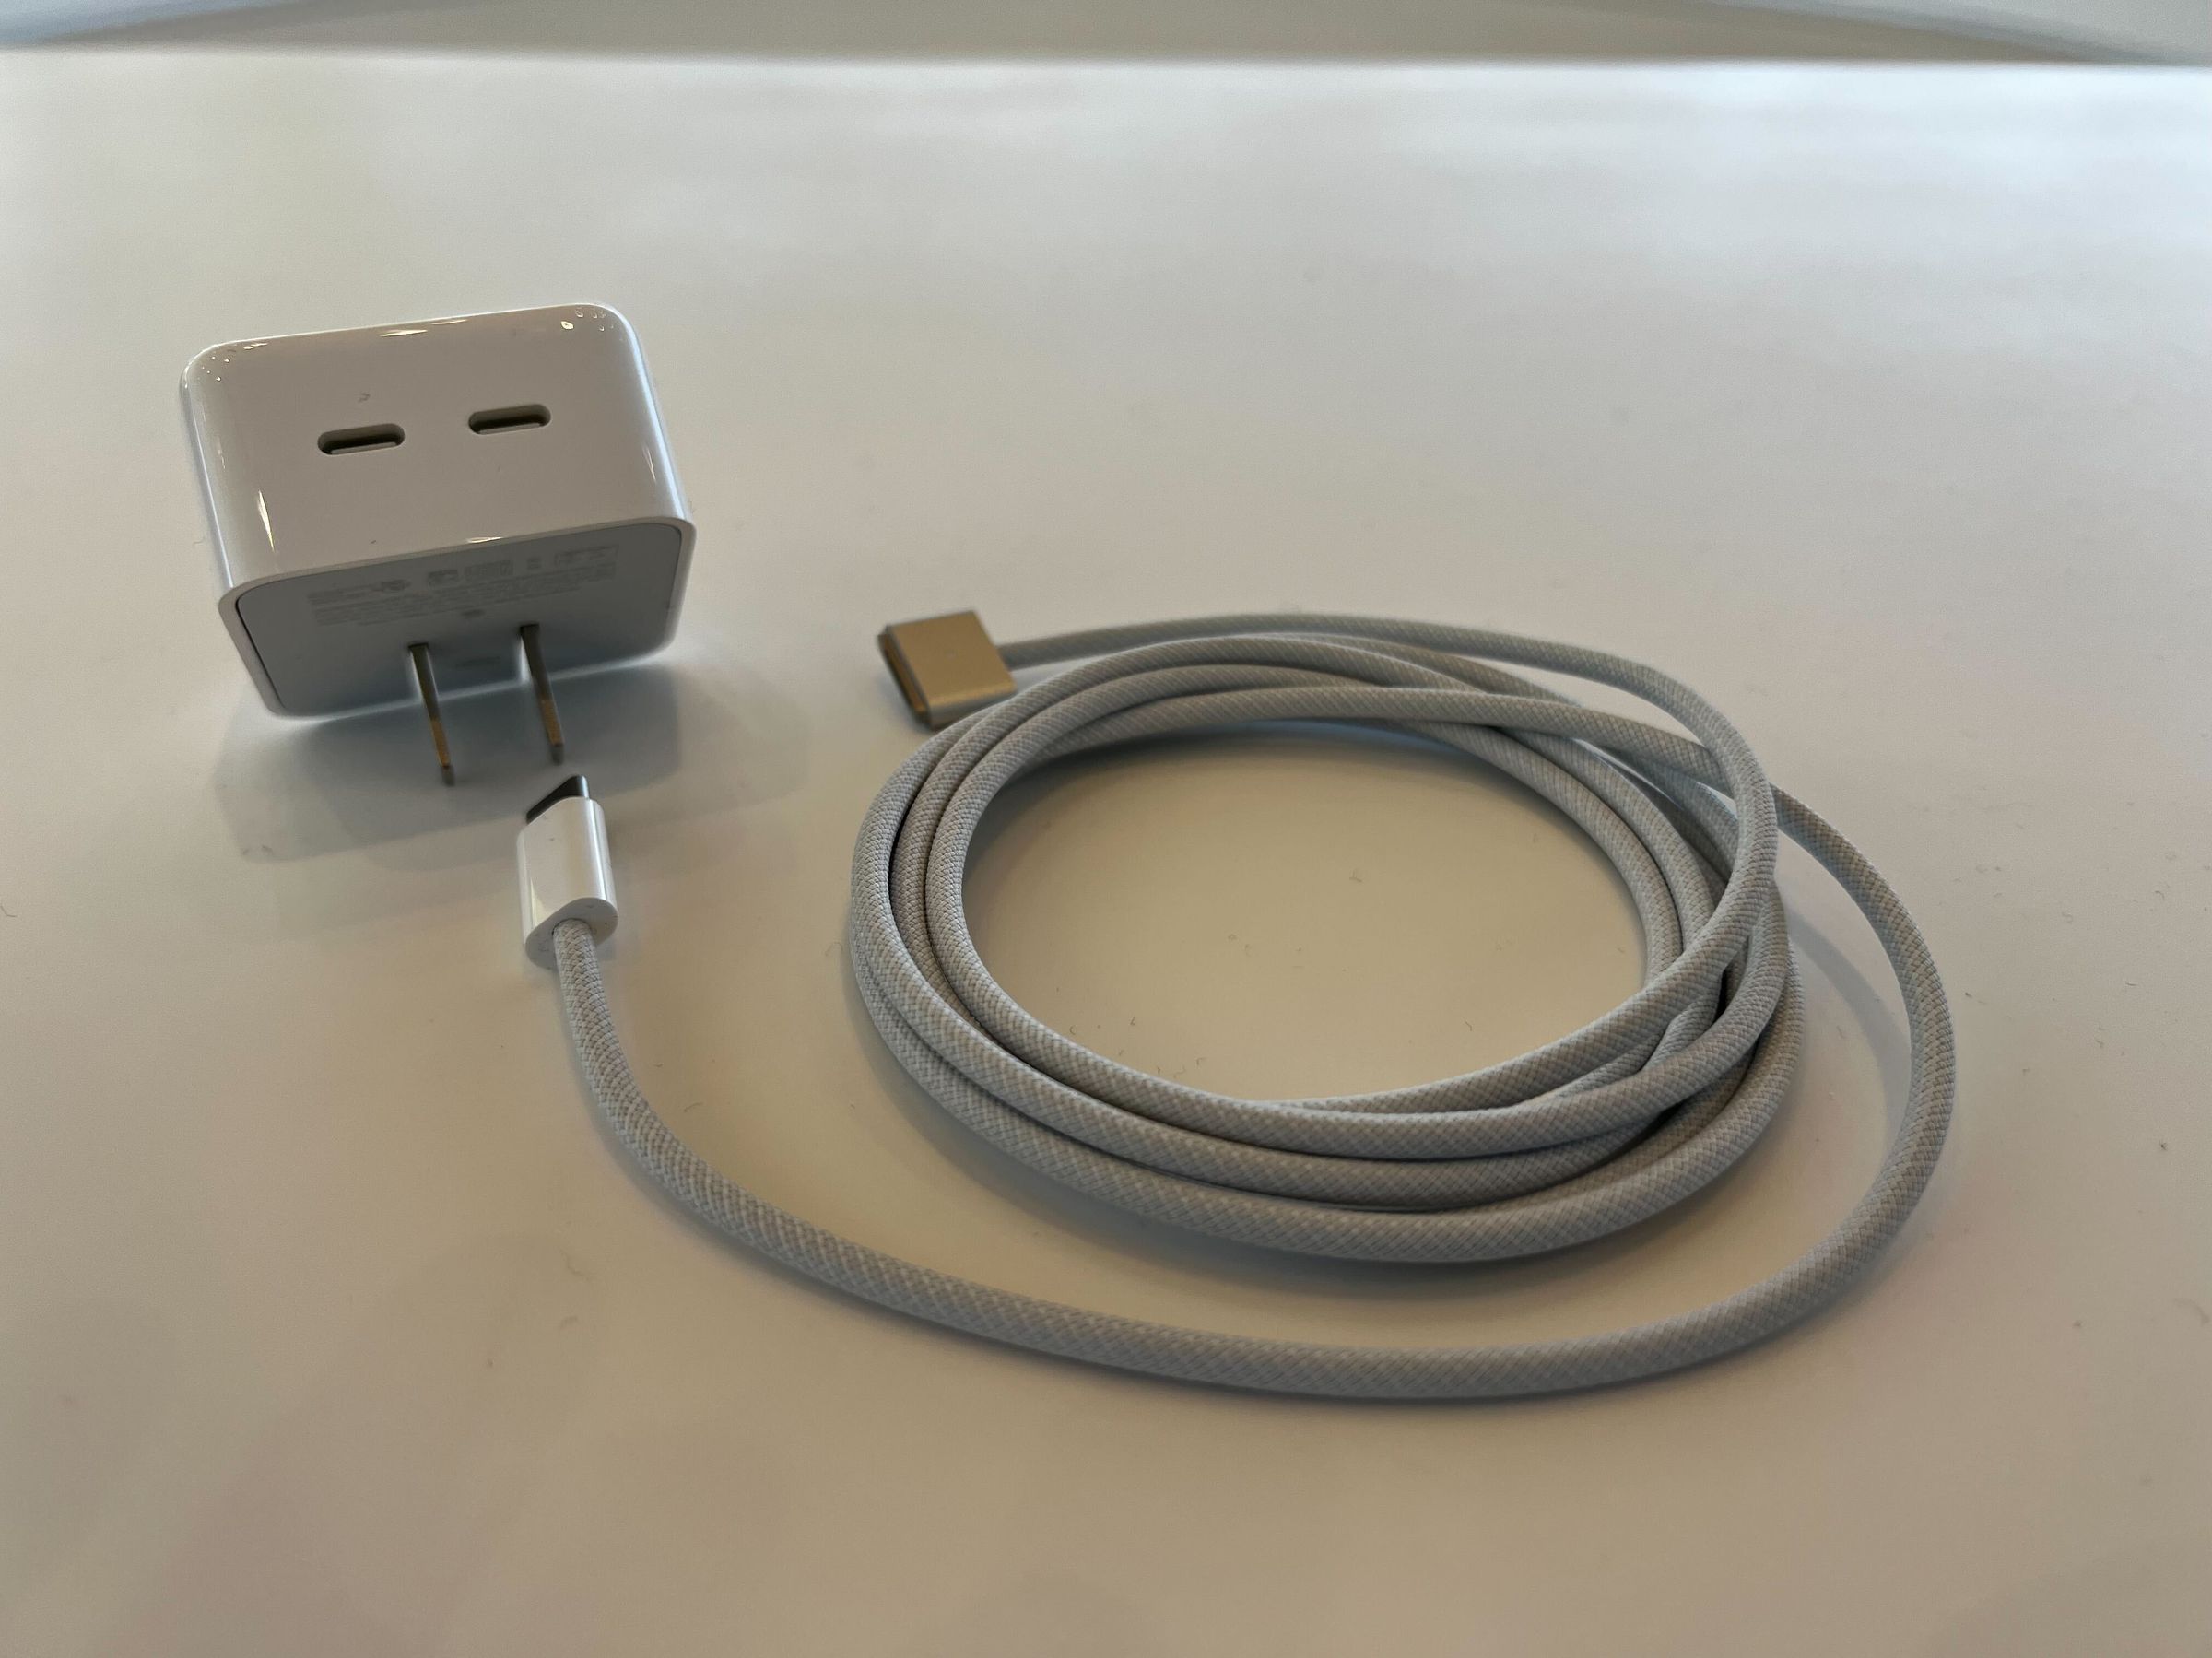 You get a color-matched cable for your MacBook Air.